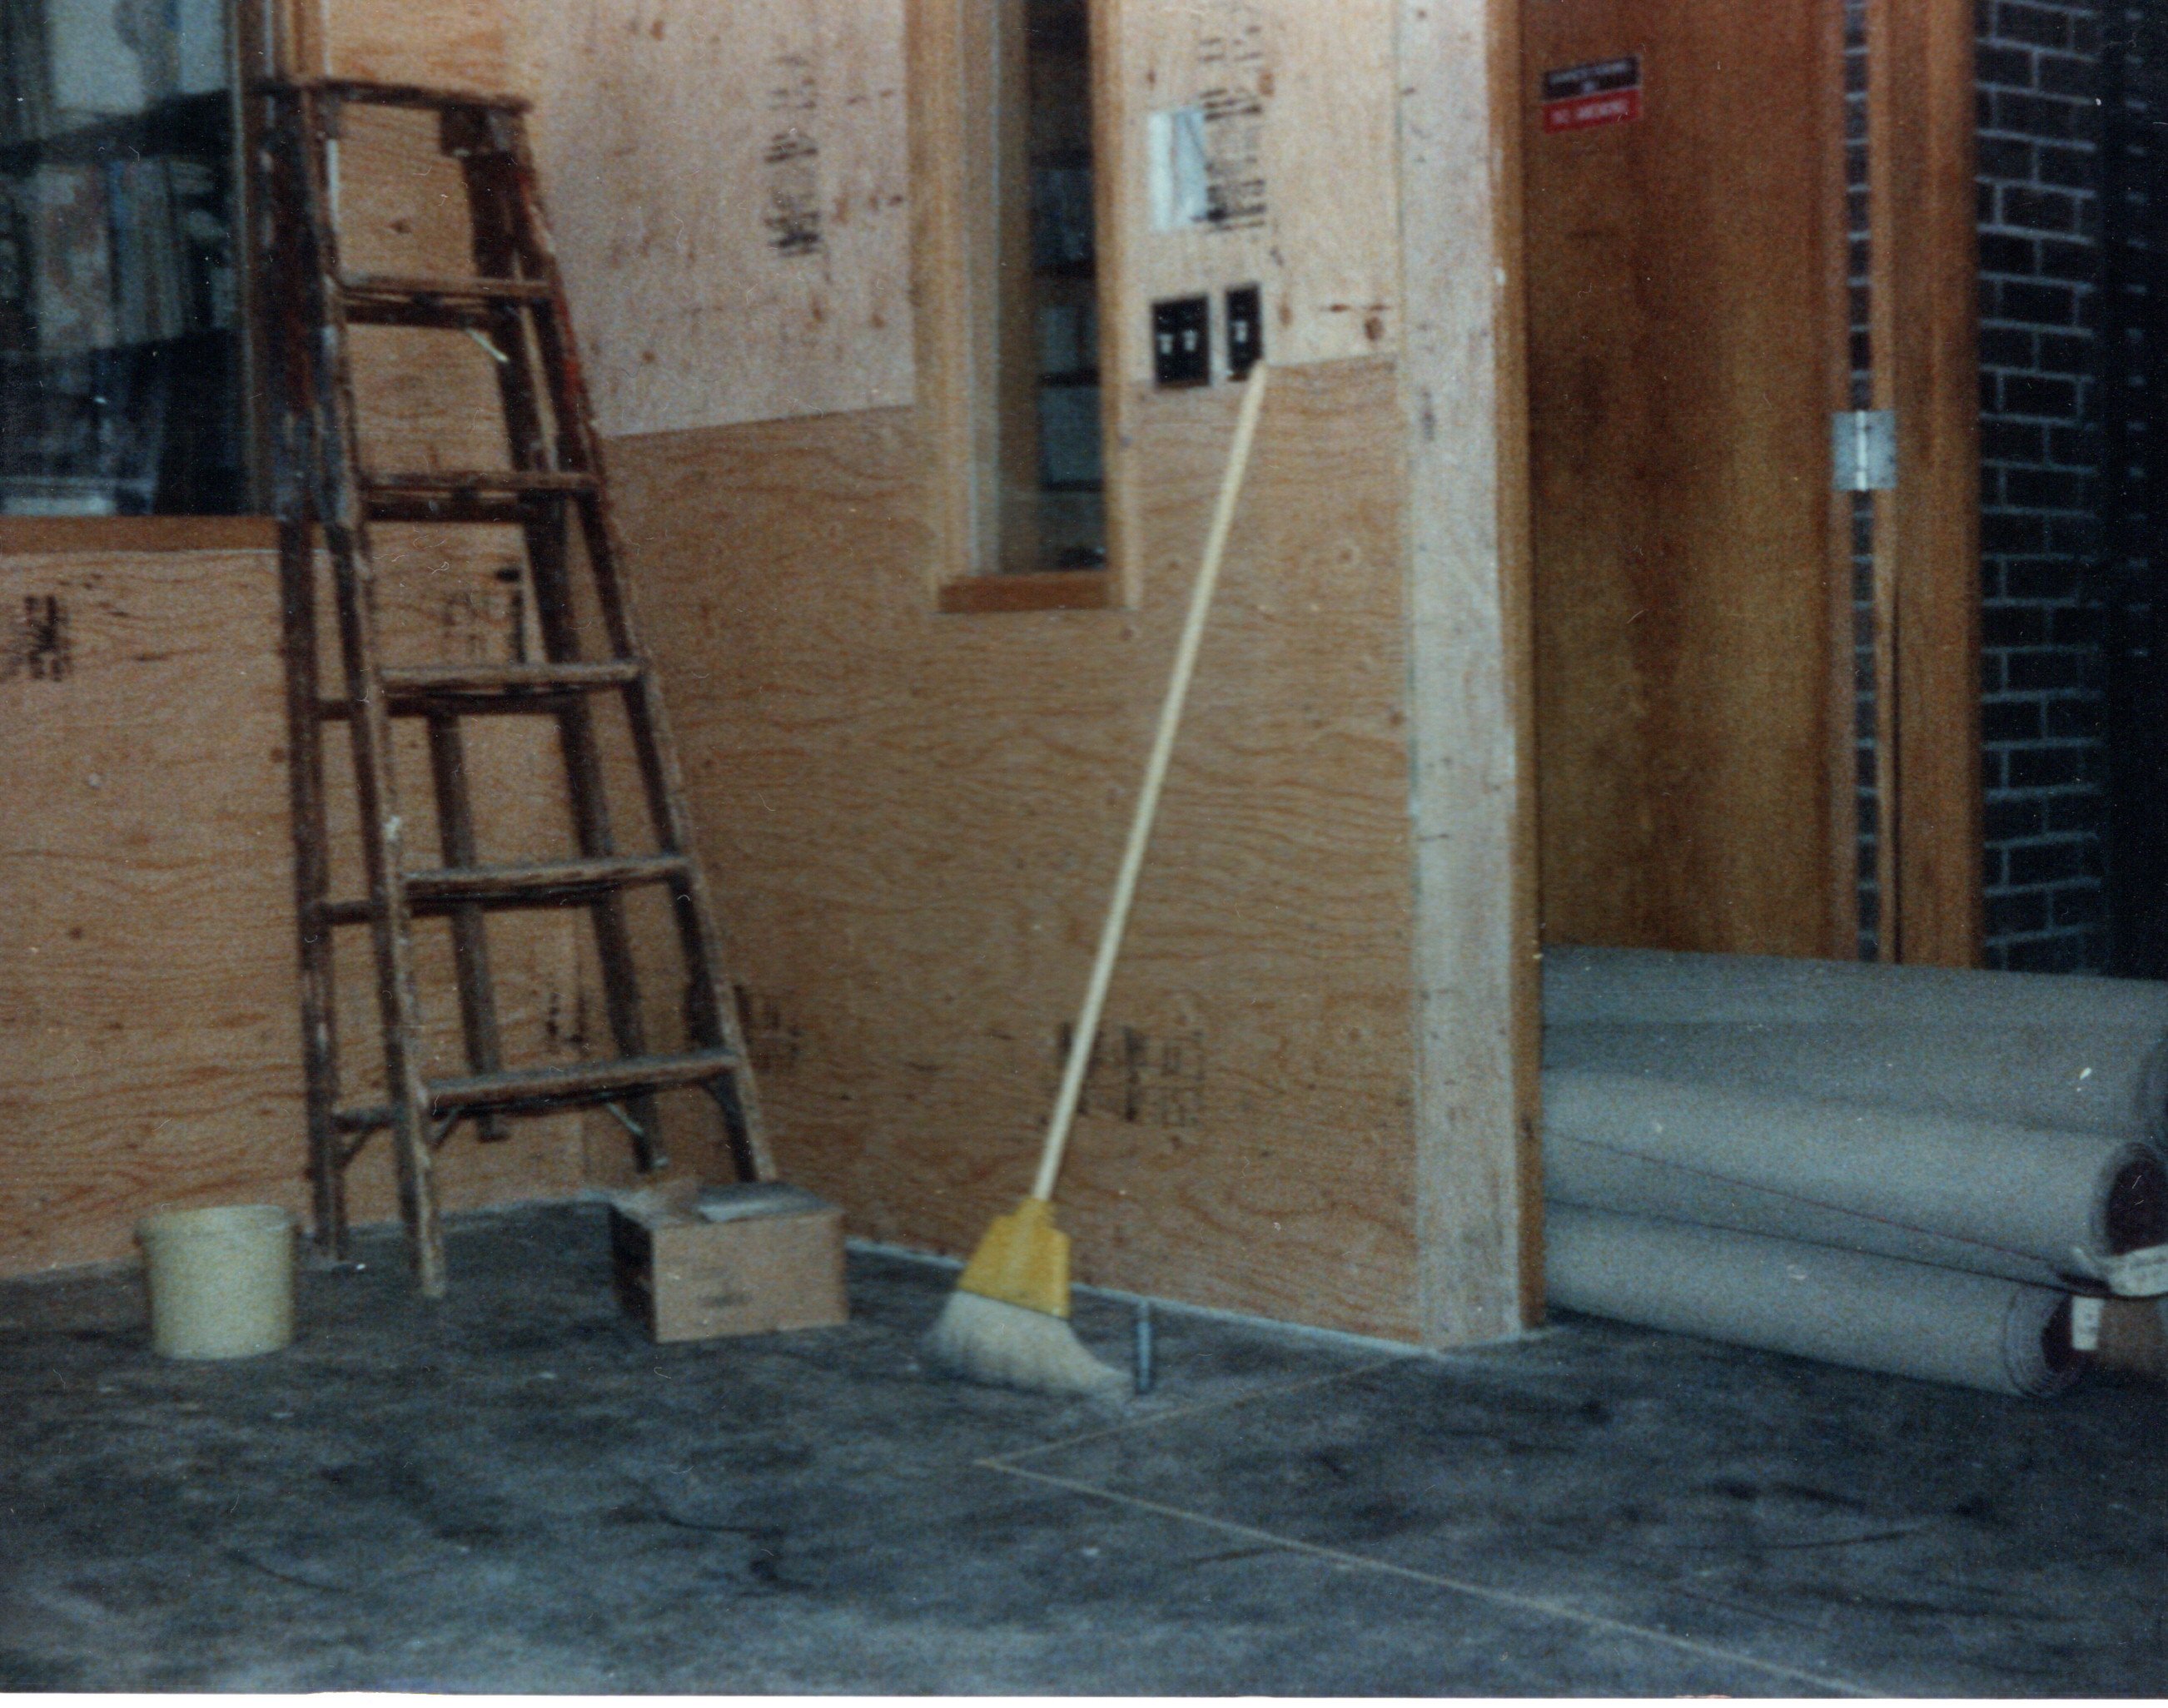 1985-Production Rebuild - The room empty with the new walls